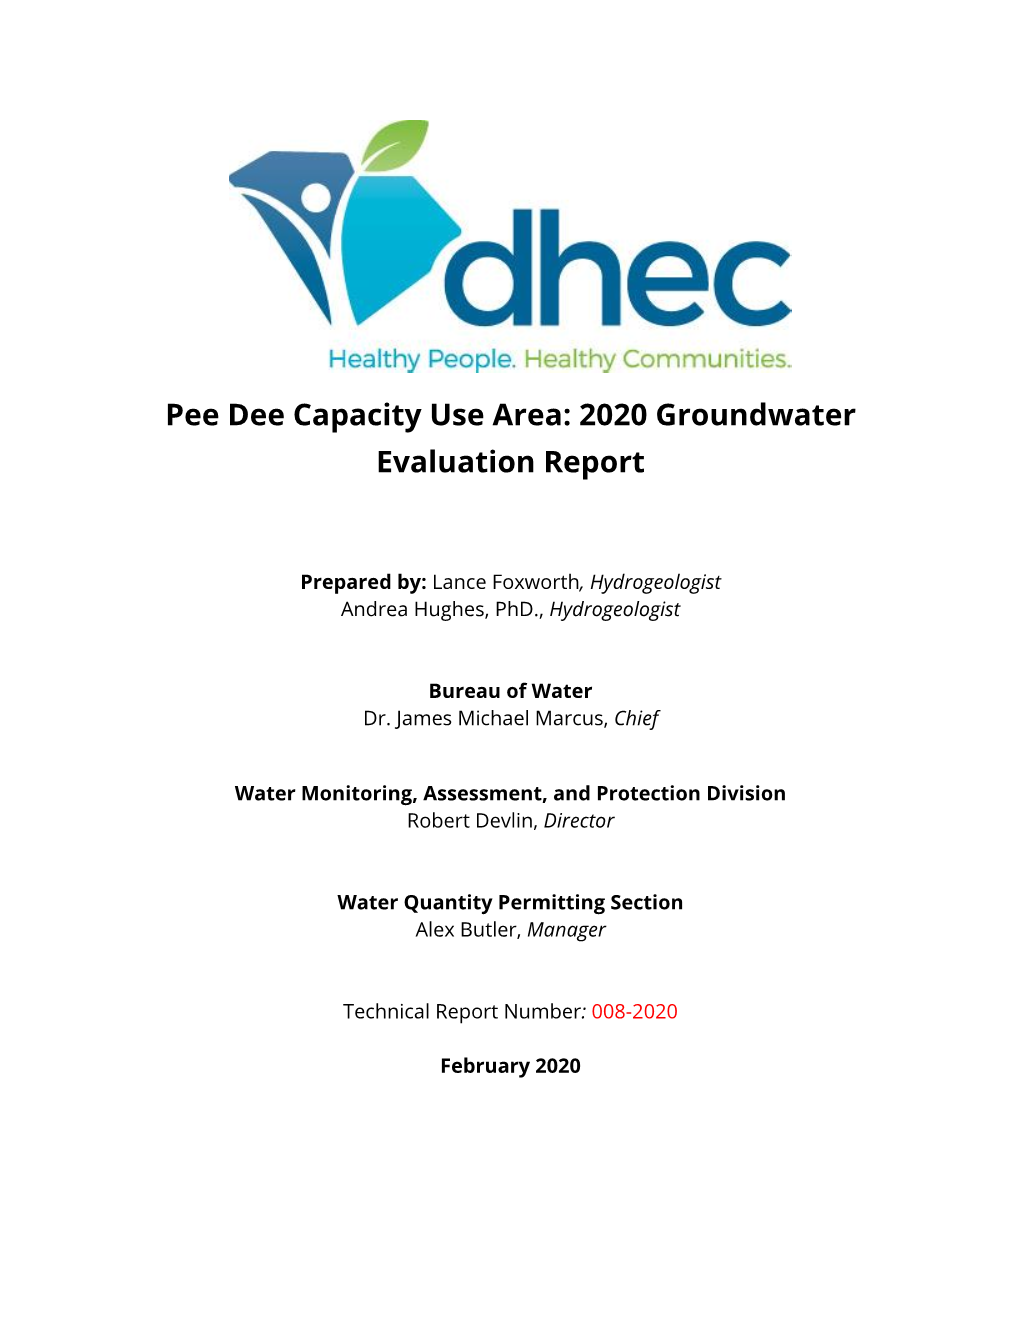 Pee Dee Capacity Use Area: 2020 Groundwater Evaluation Report